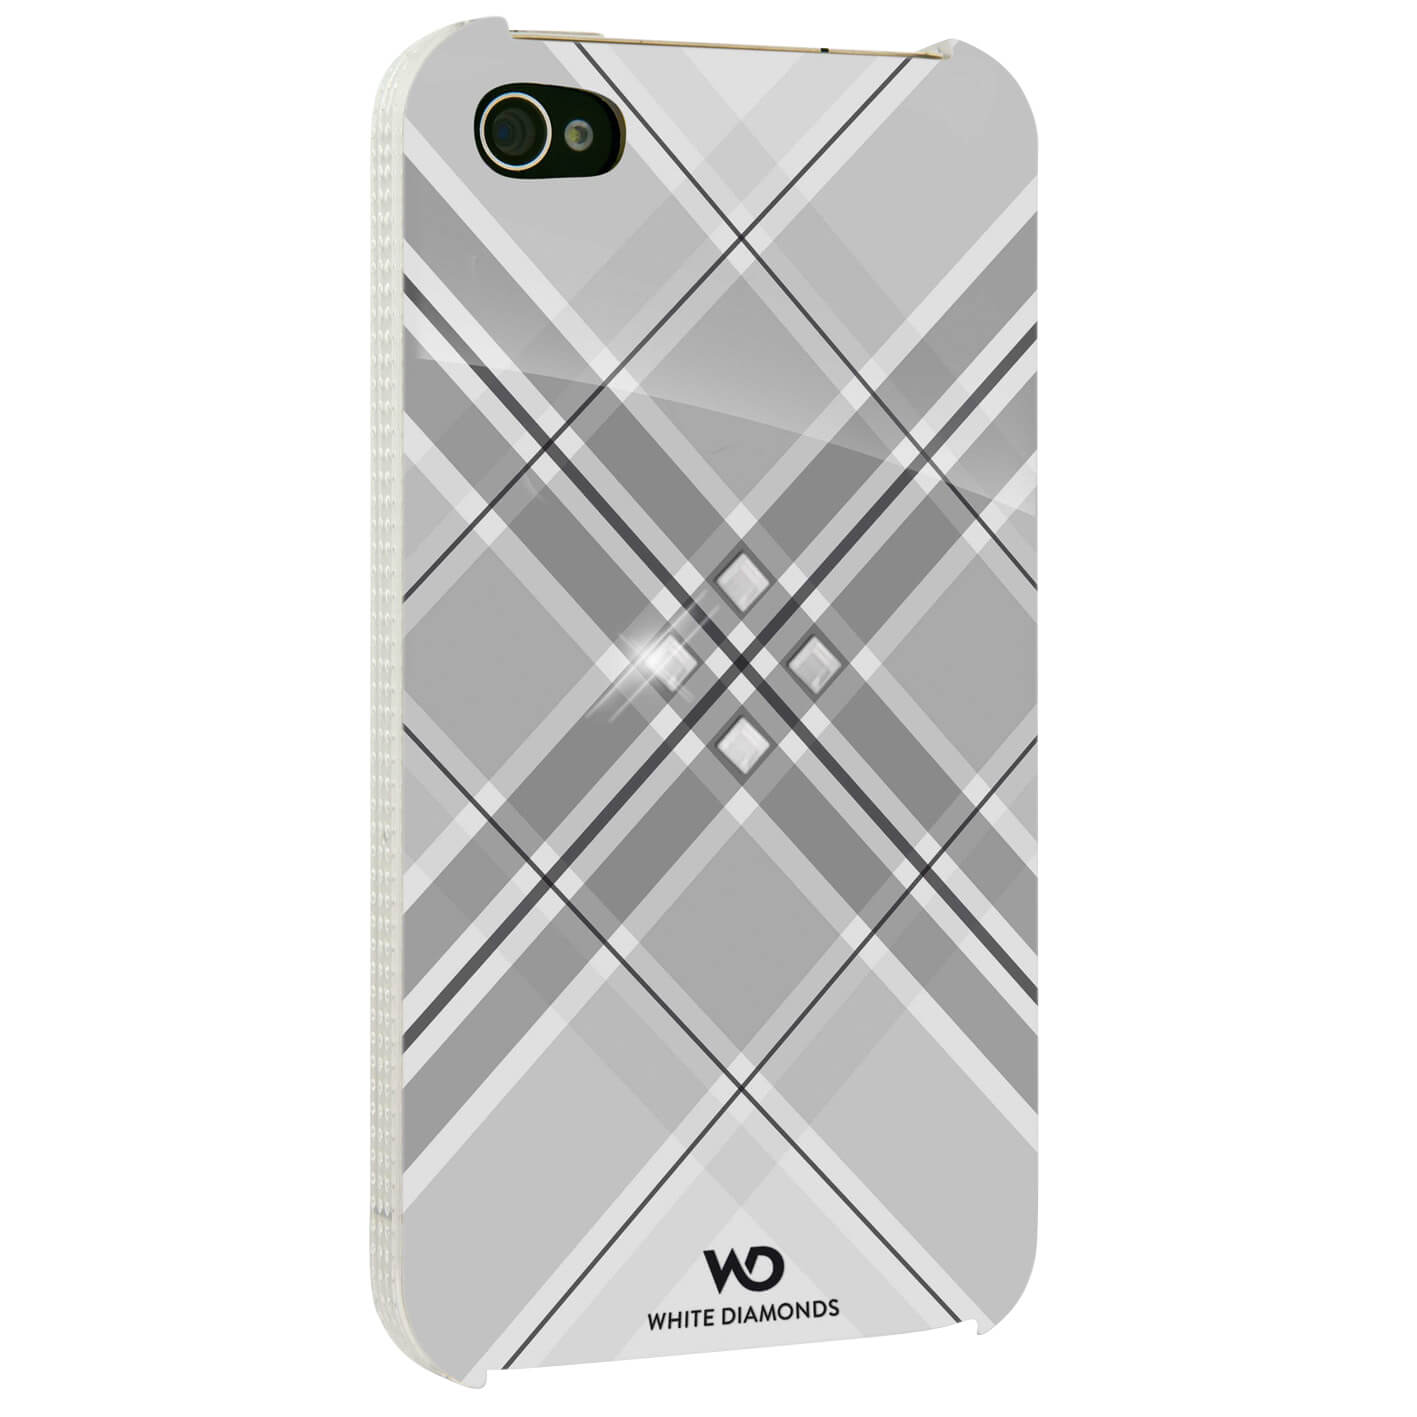 Grid Mobile Phone Cover for A pple iPhone 4/4S, white